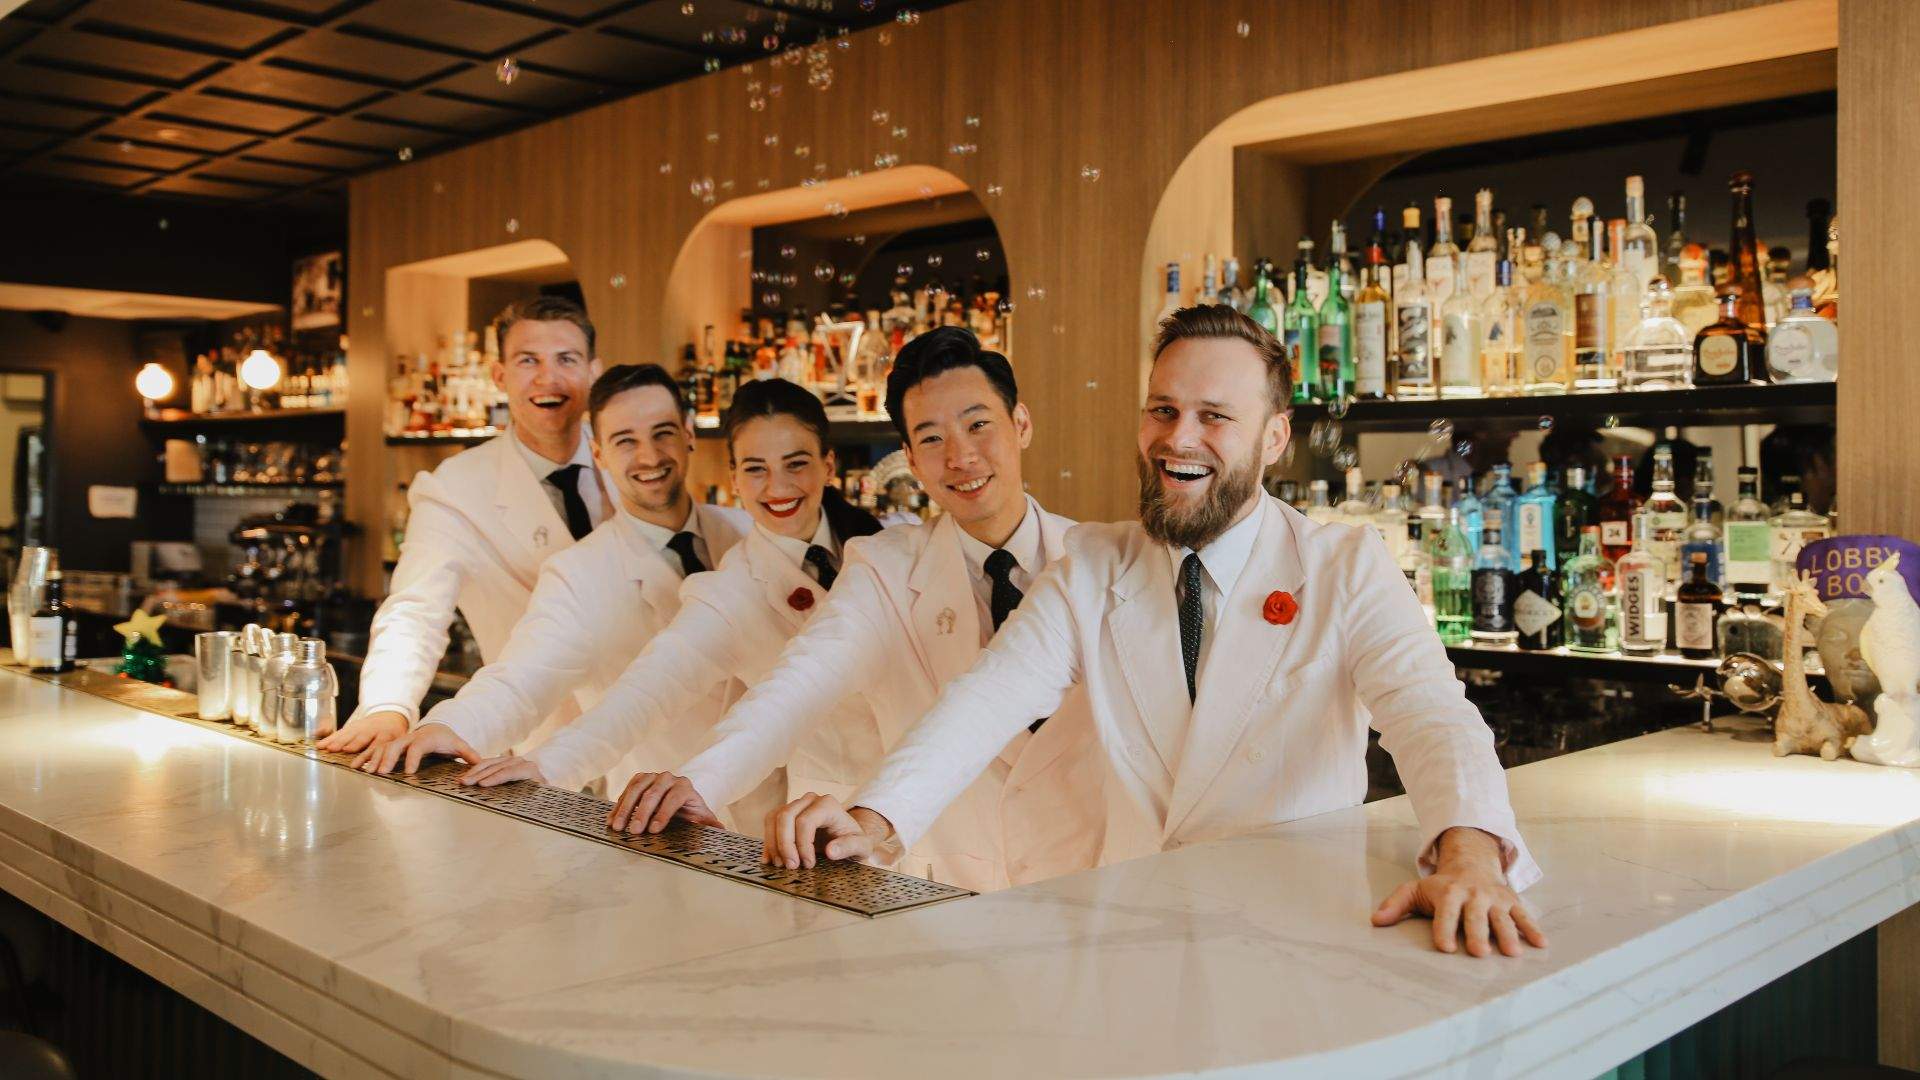 Five bartenders lining up at the bar, smiling in white suits at Maybe Sammy - one of the best bars in Sydney